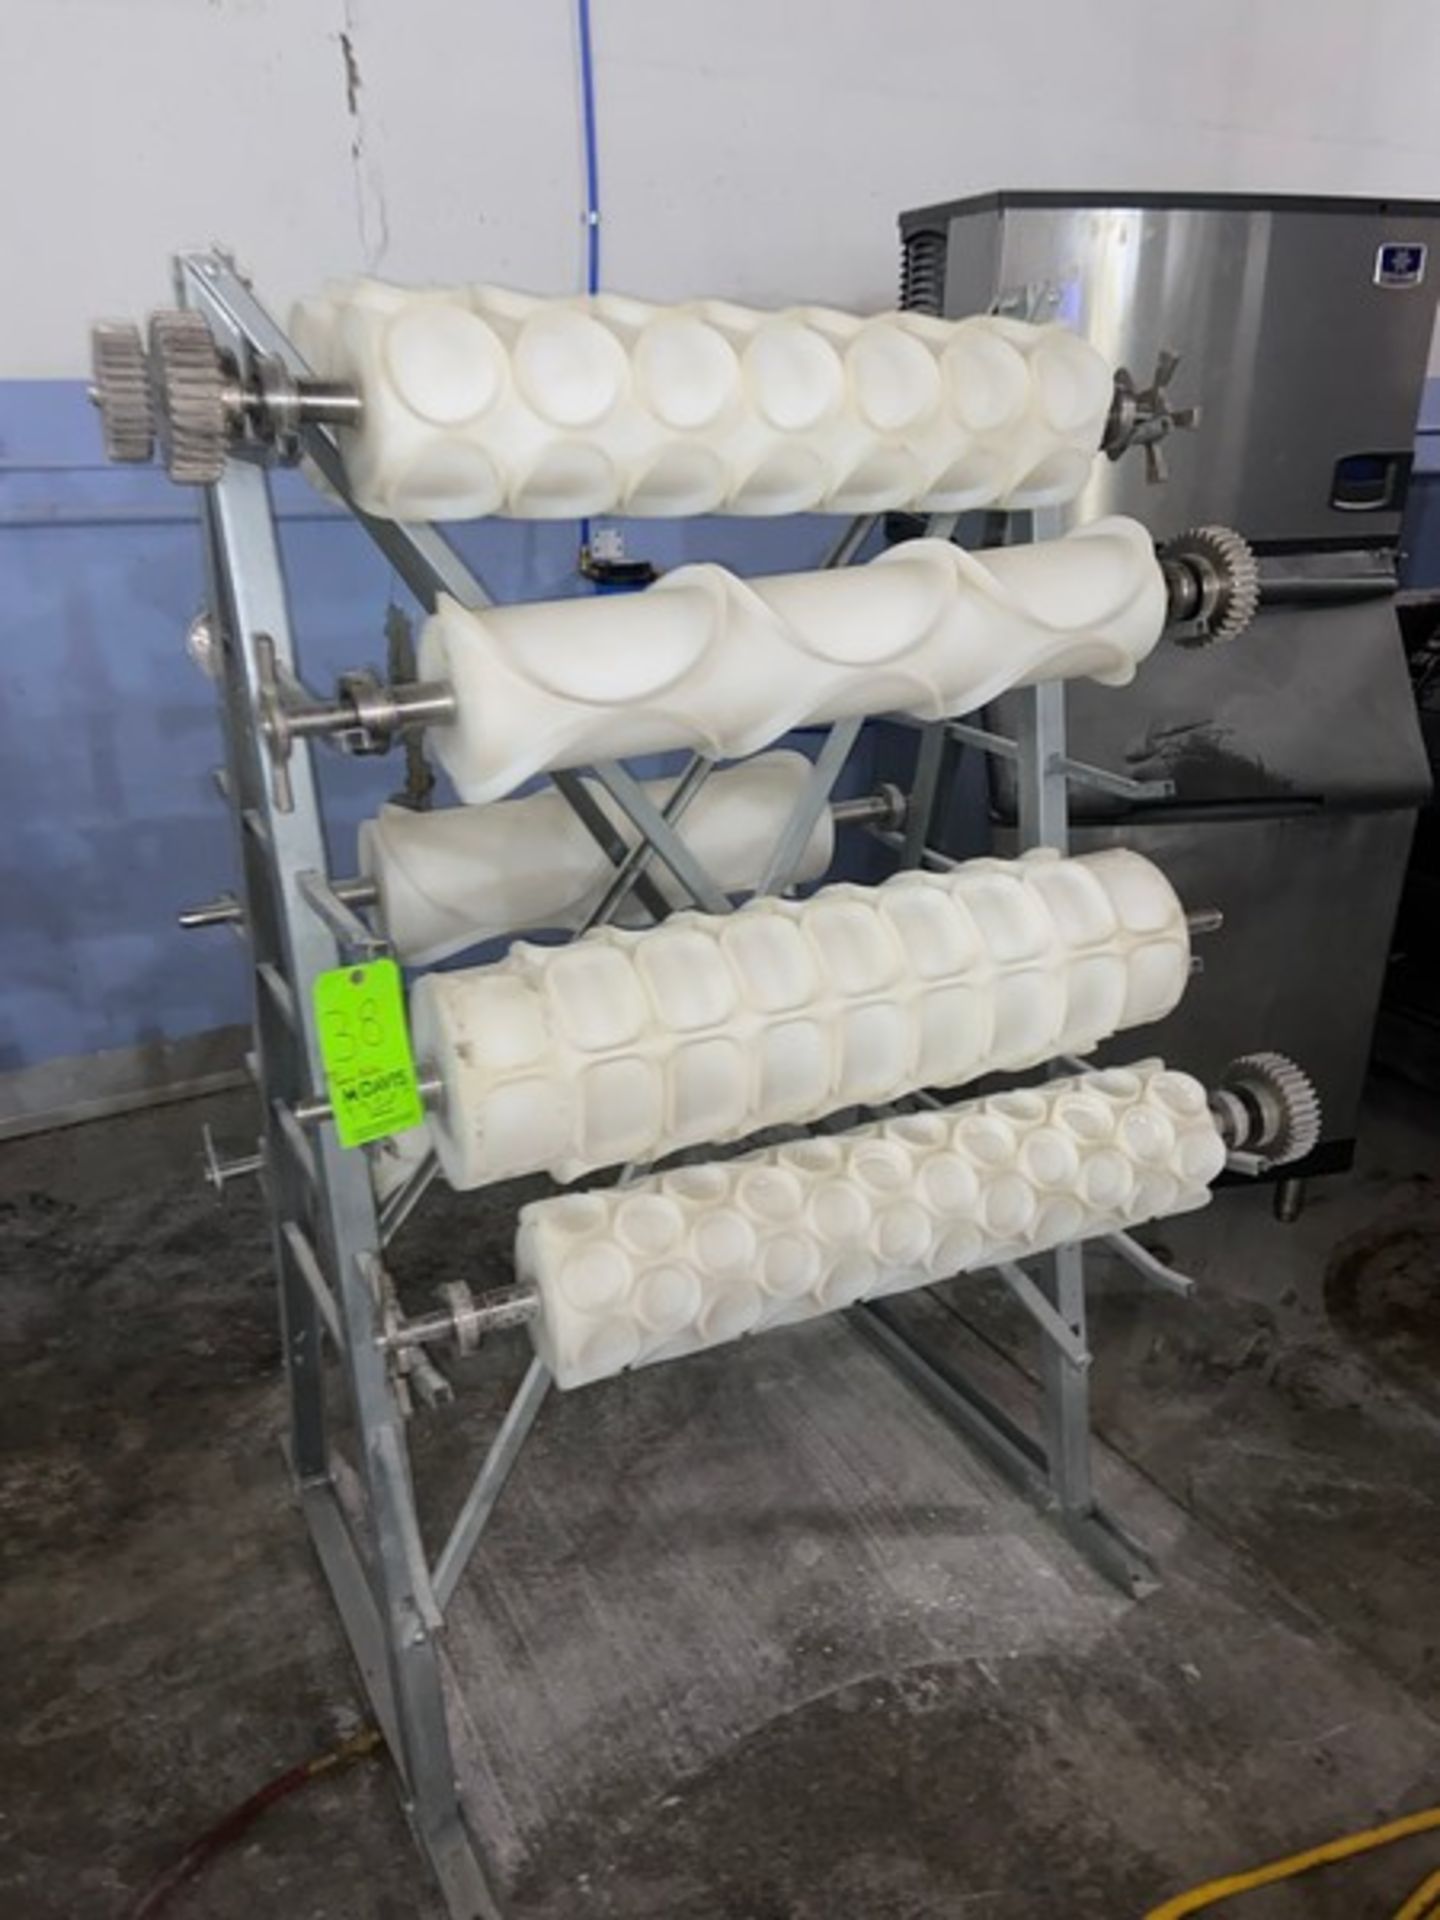 (6) Forming Rolls of Tromp Line, Includes Round & Oval Pita Rolls, Includes Aluminum Rack (LOCATED